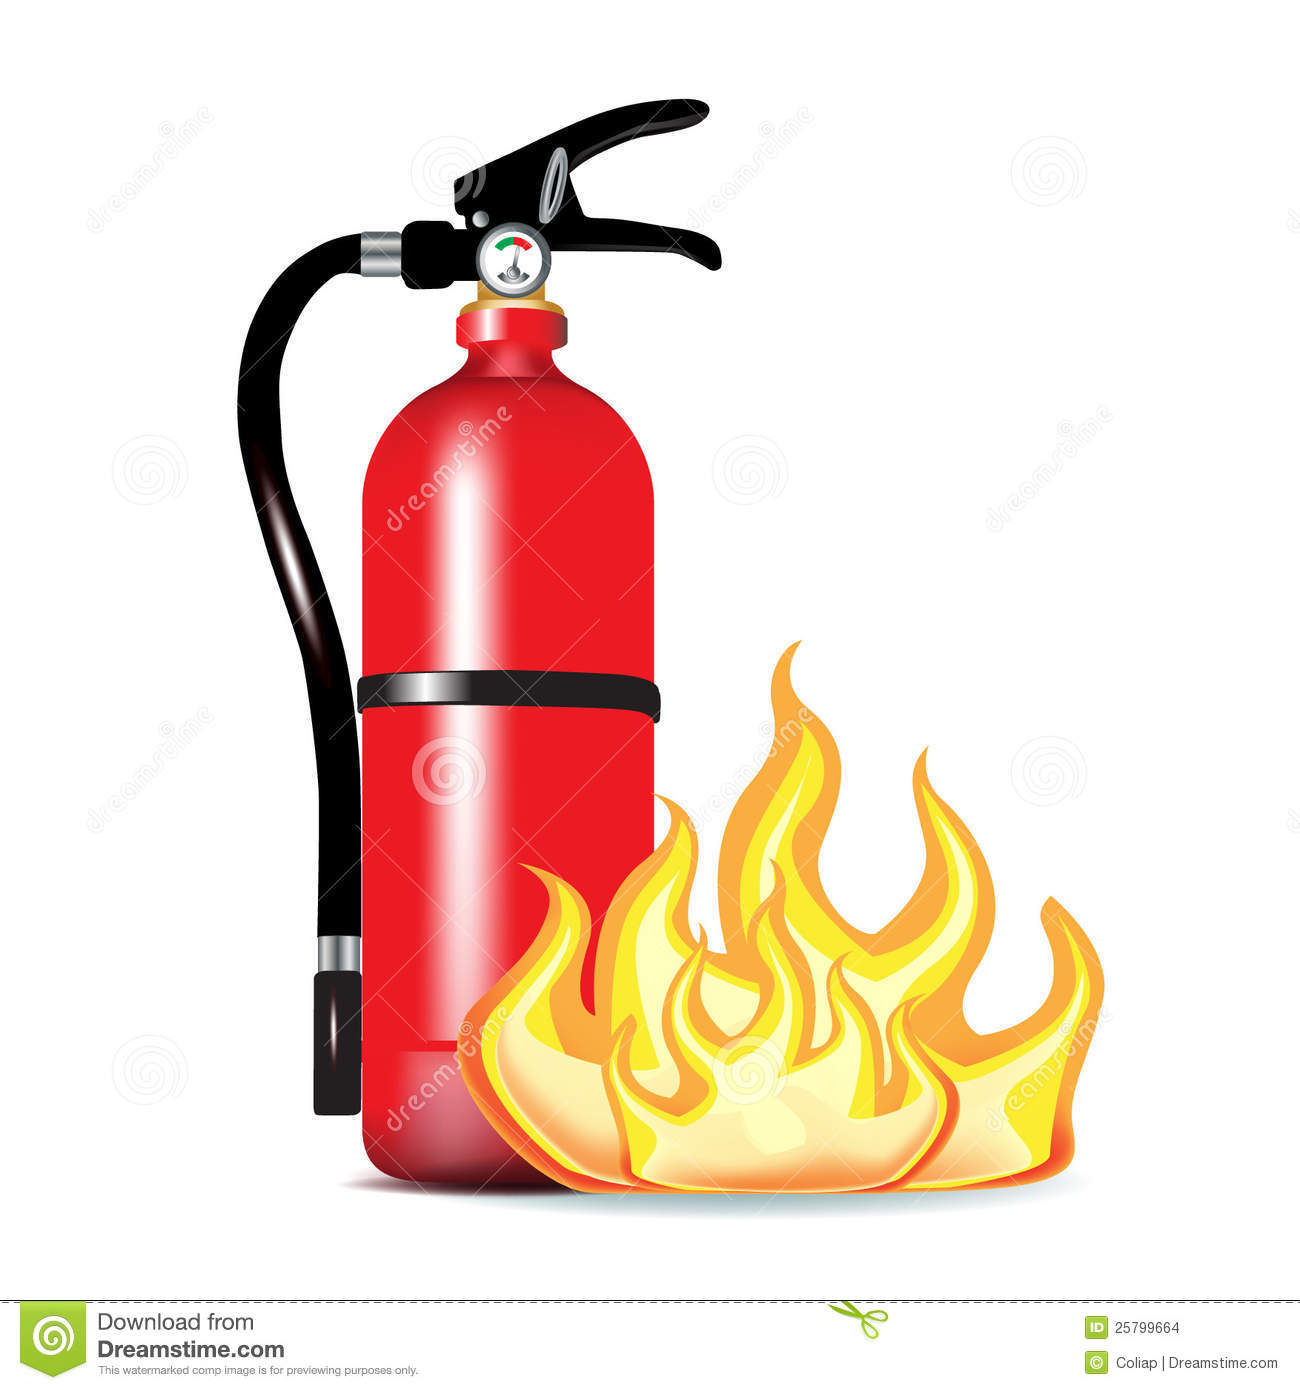 Fire Extinguisher Images . Fi